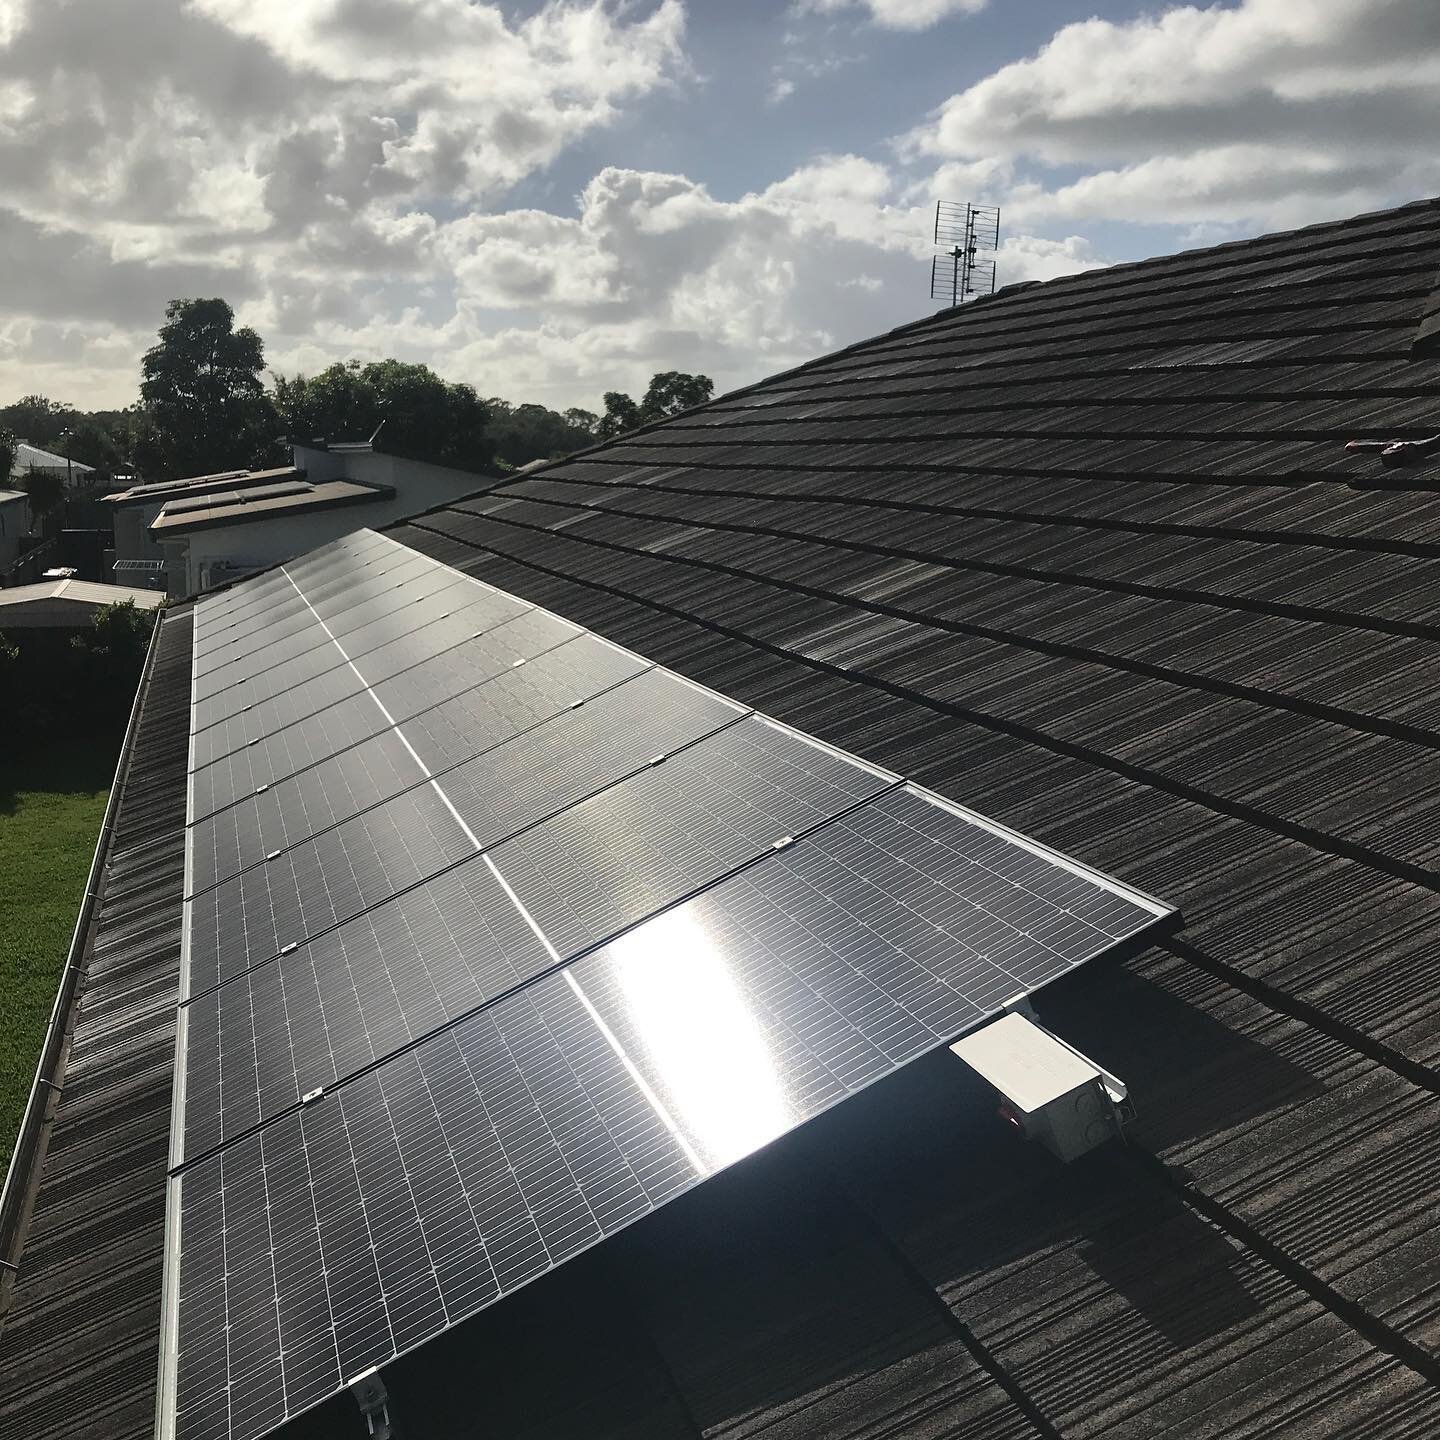 Here we have a existing 6.6 kw system  consisting of 23 x 315 panels and a 5 kw Fronius inverter. 
The customer was still getting $300 power bills and enquired if we could possibly add to the system size.

We have added another 13 x 370 watt panels a